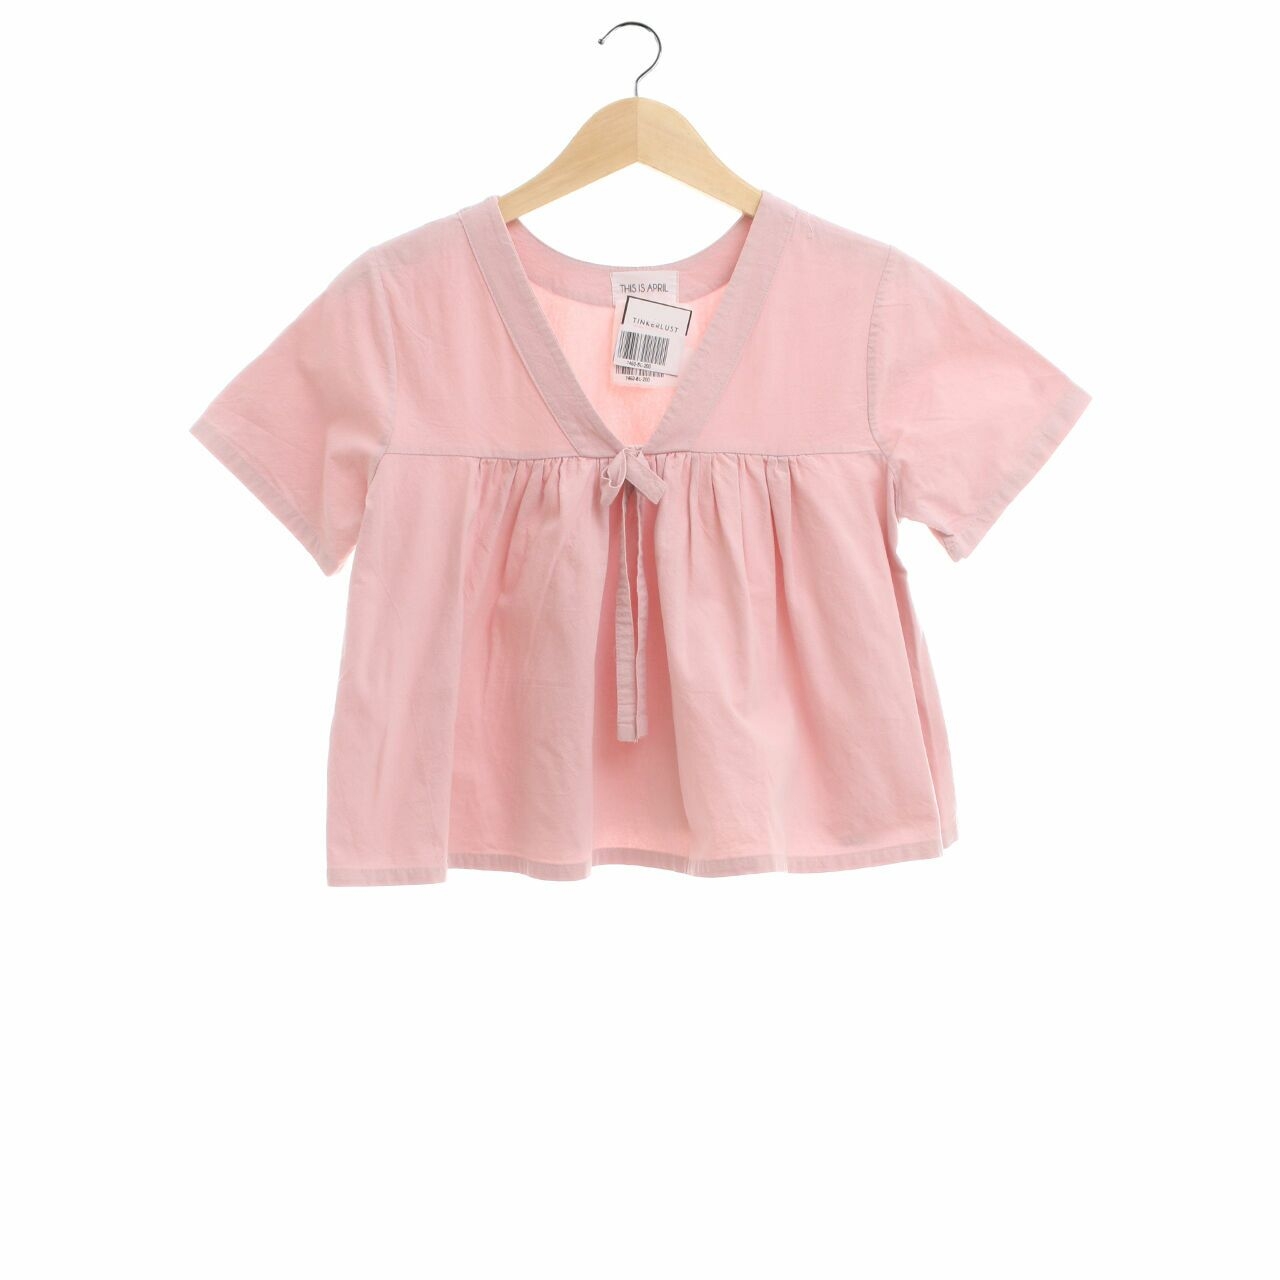 This is April Pink Pastel Blouse